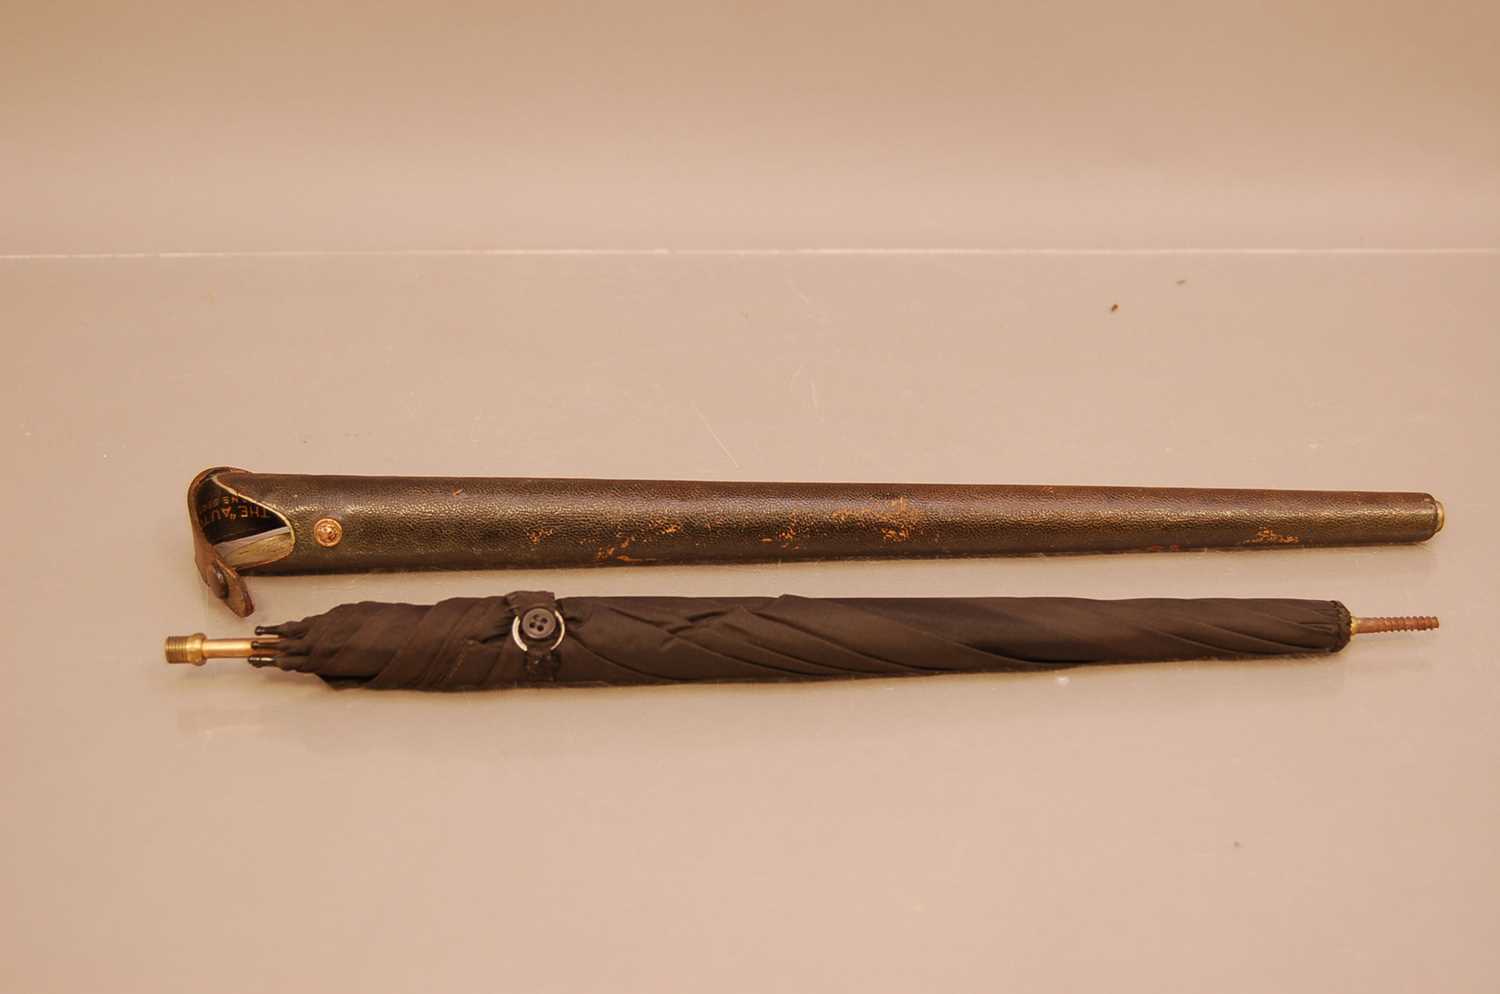 Lot 129 - An early 20th century umbrella, titled The Auto to inner of case, the leather case housing the black umbrella that screws into the case handle, lacks finial